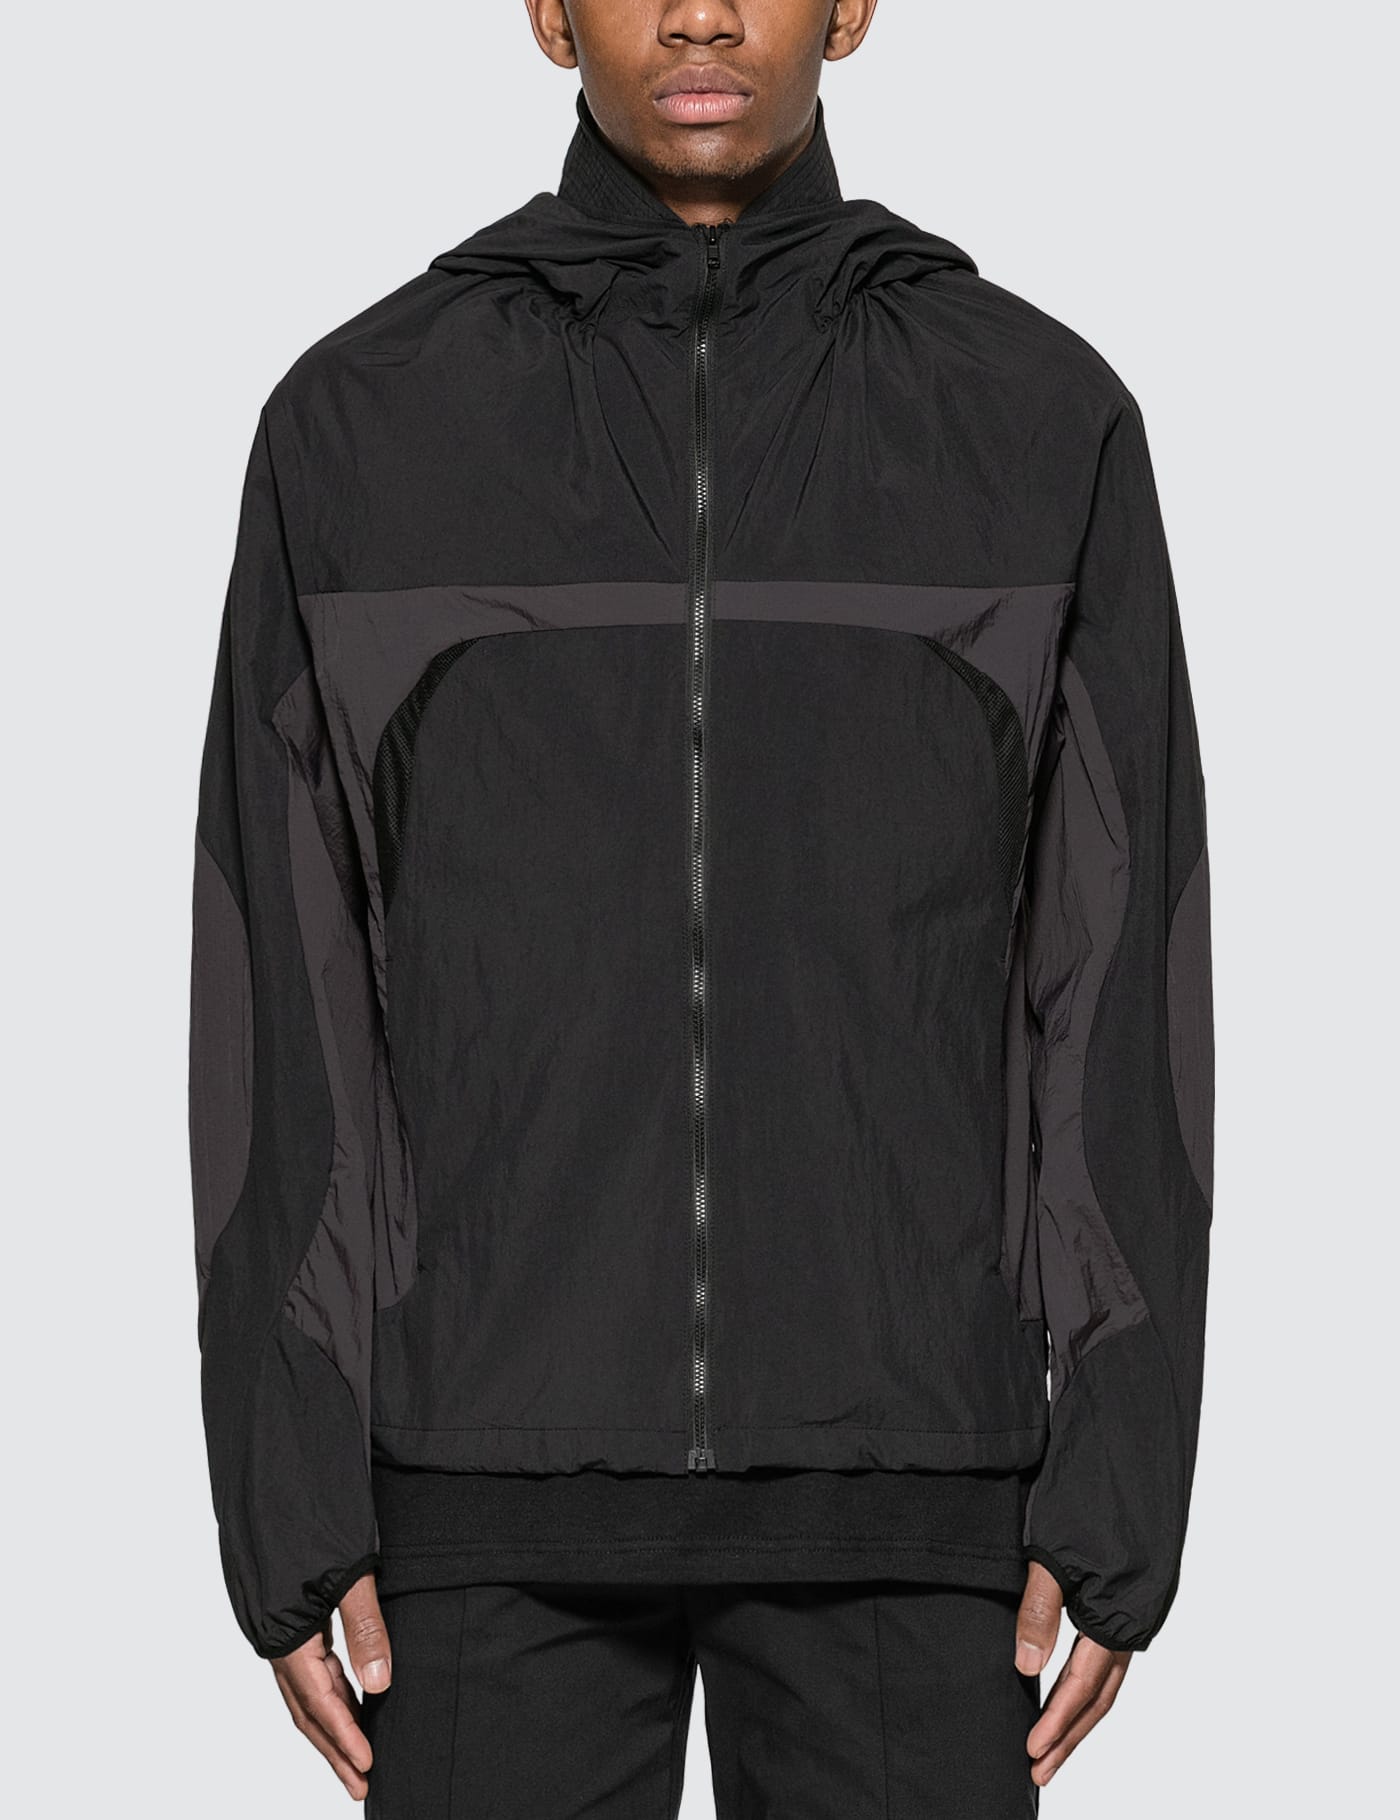 POST ARCHIVE FACTION (PAF) - 3.0 Technical Jacket Right | HBX 